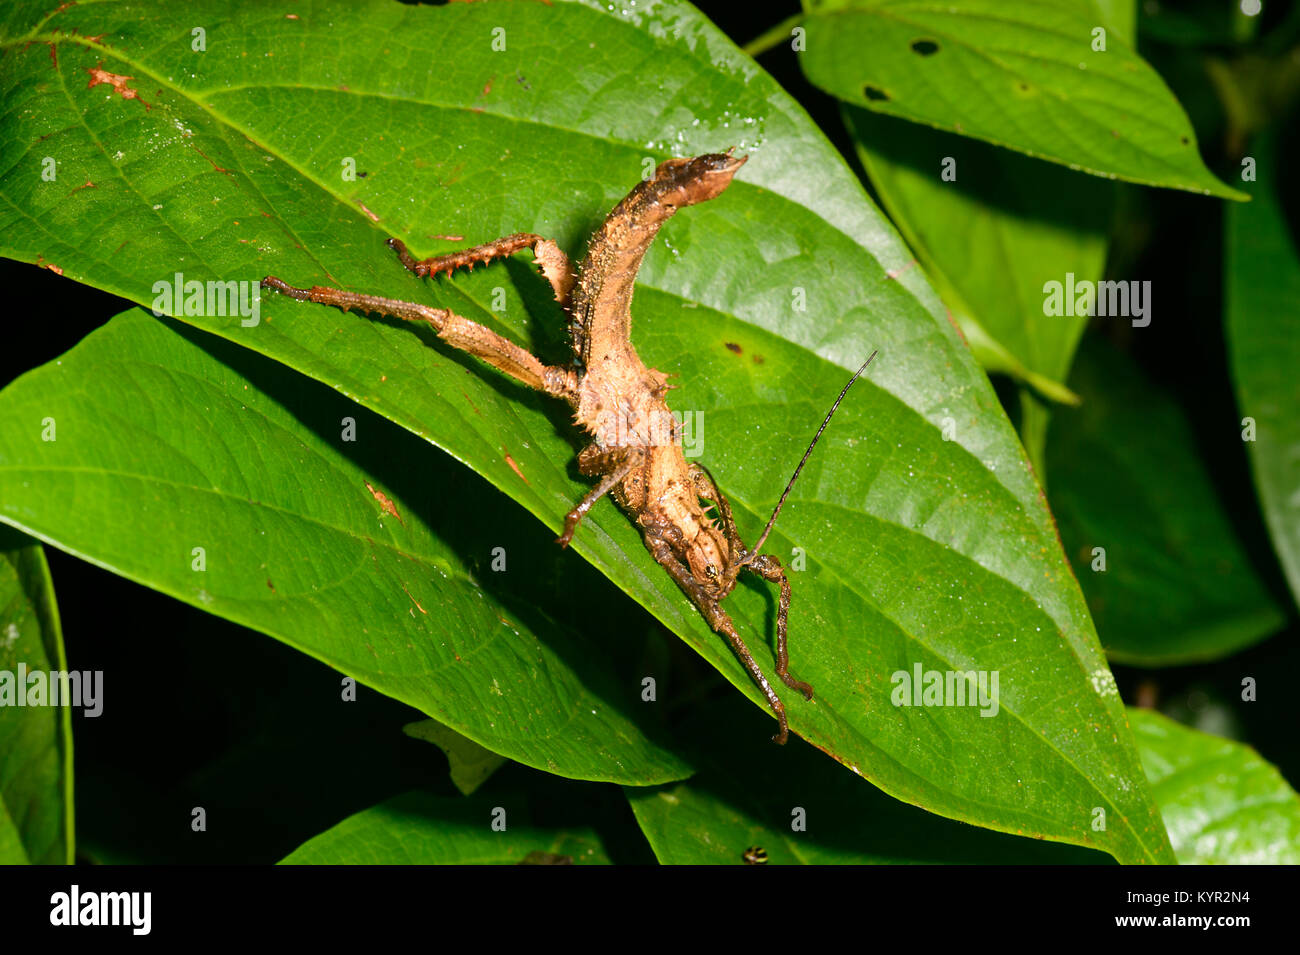 Close-up of a Thorny Stick Insect (Aretaon asperrimus) in threat position, Tabin, Borneo, Sabah, Malaysia Stock Photo